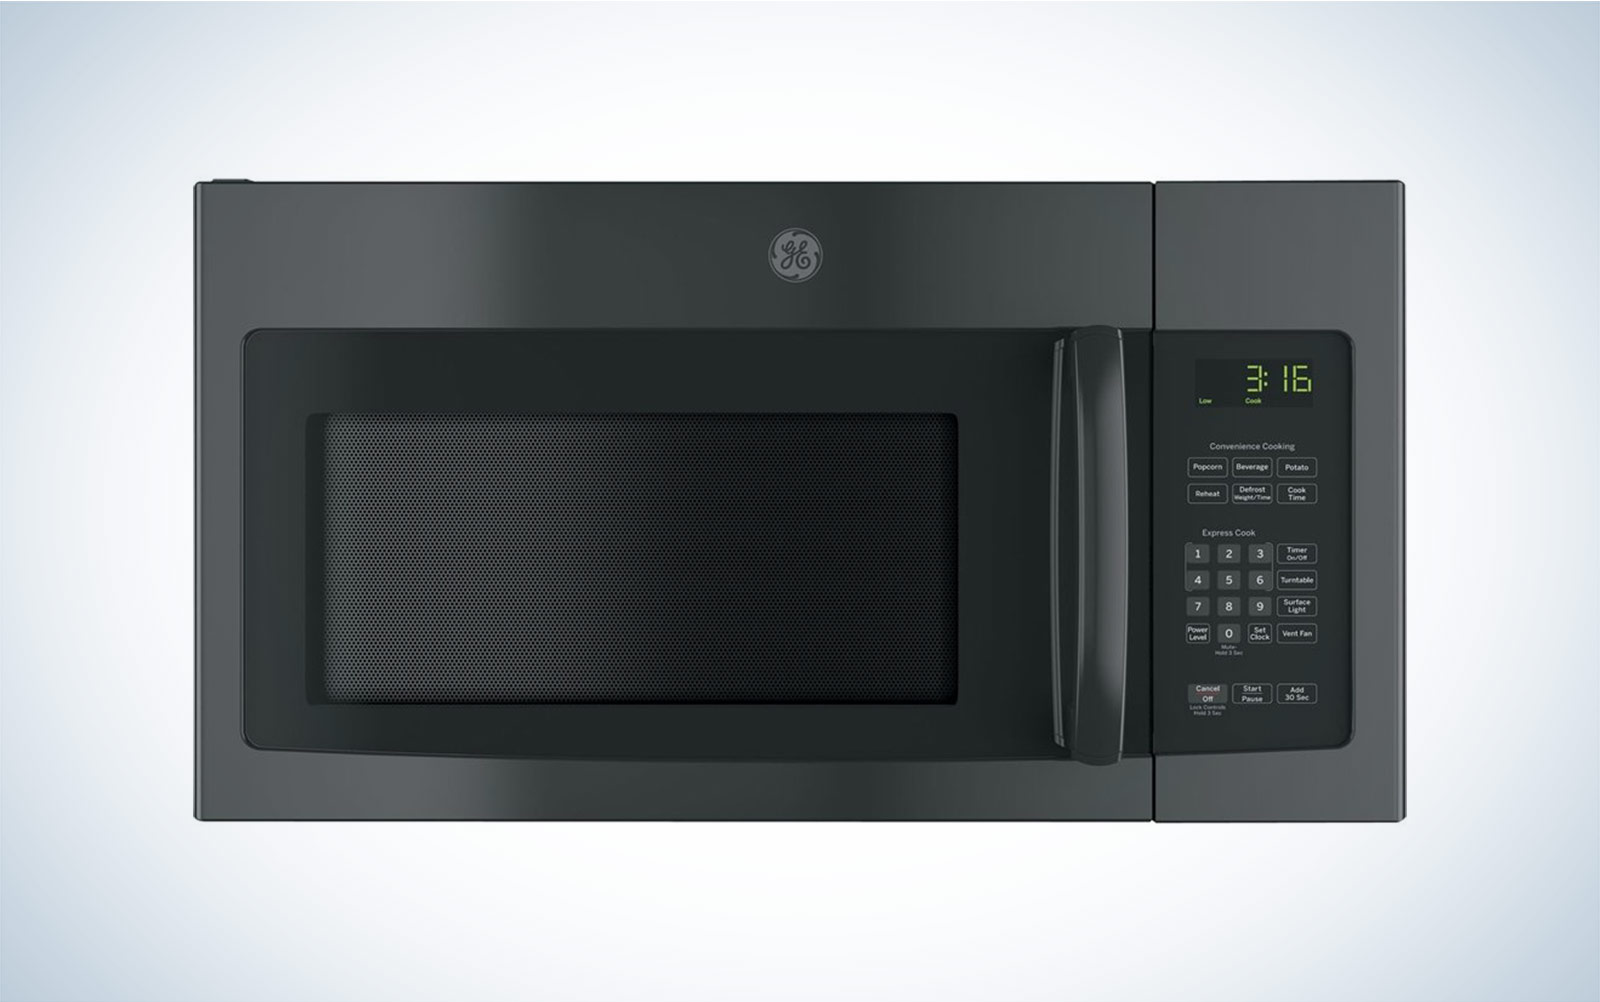 Auto-Out Microwave, United States